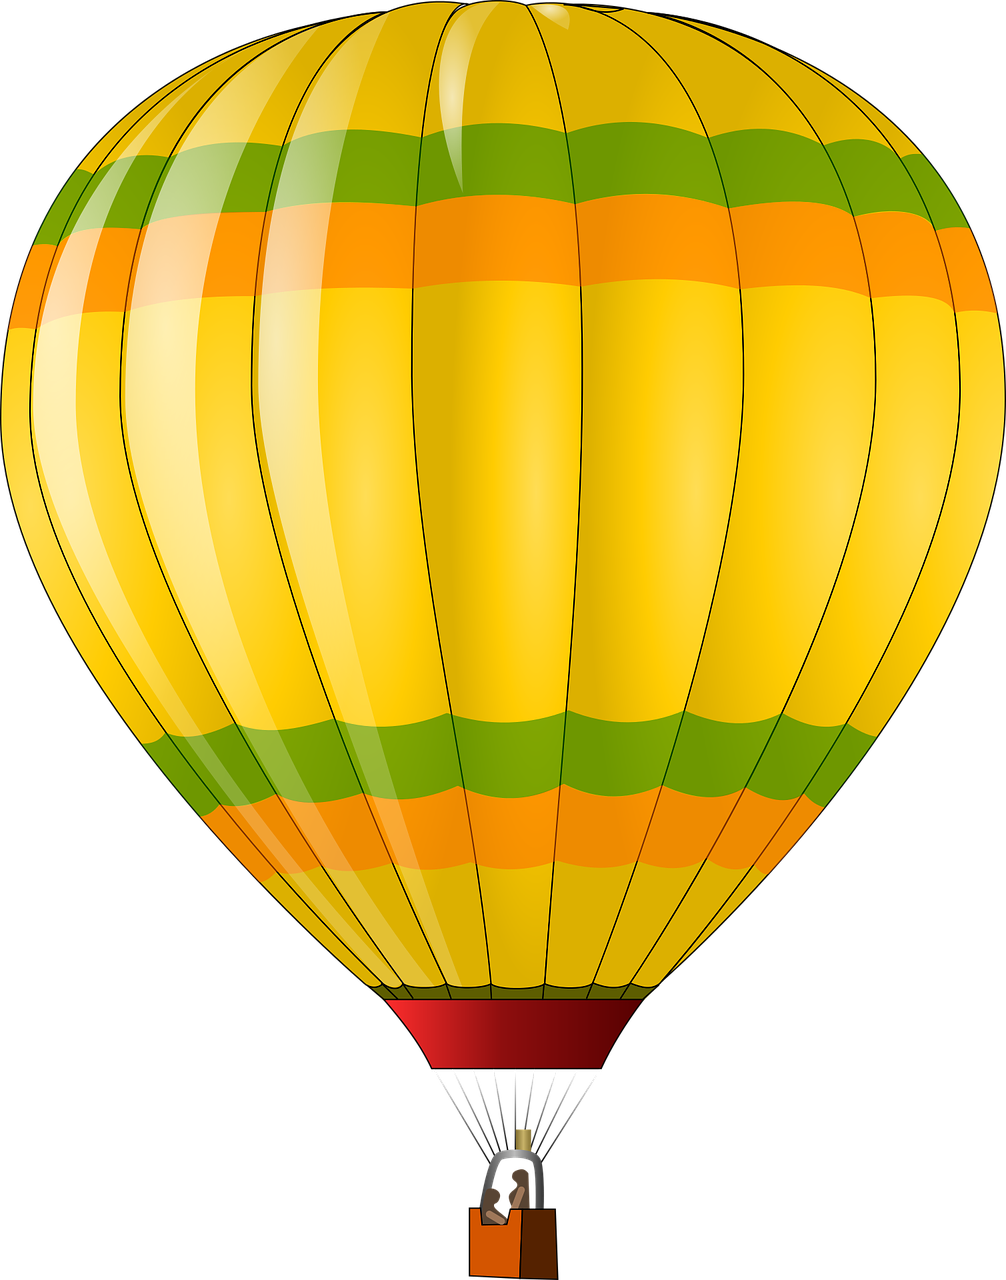 a yellow and green striped hot air balloon, by Radi Nedelchev, no gradients, bright on black, view from bottom to top, view from the side